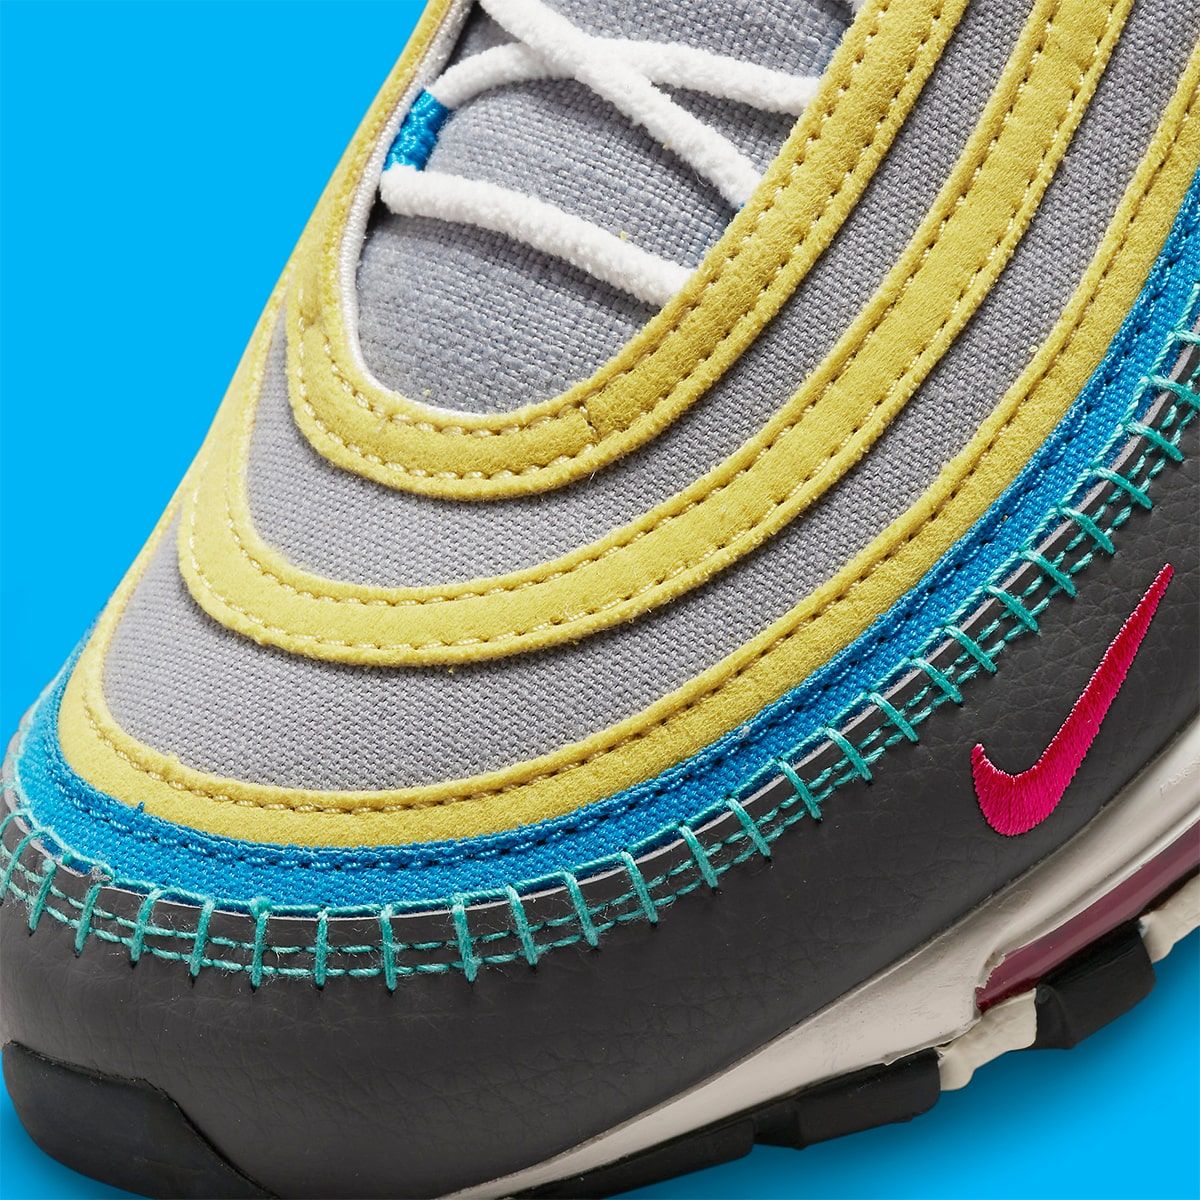 Nike Adds the Air Max 97 to the Air Sprung Collection - JustFreshKicks